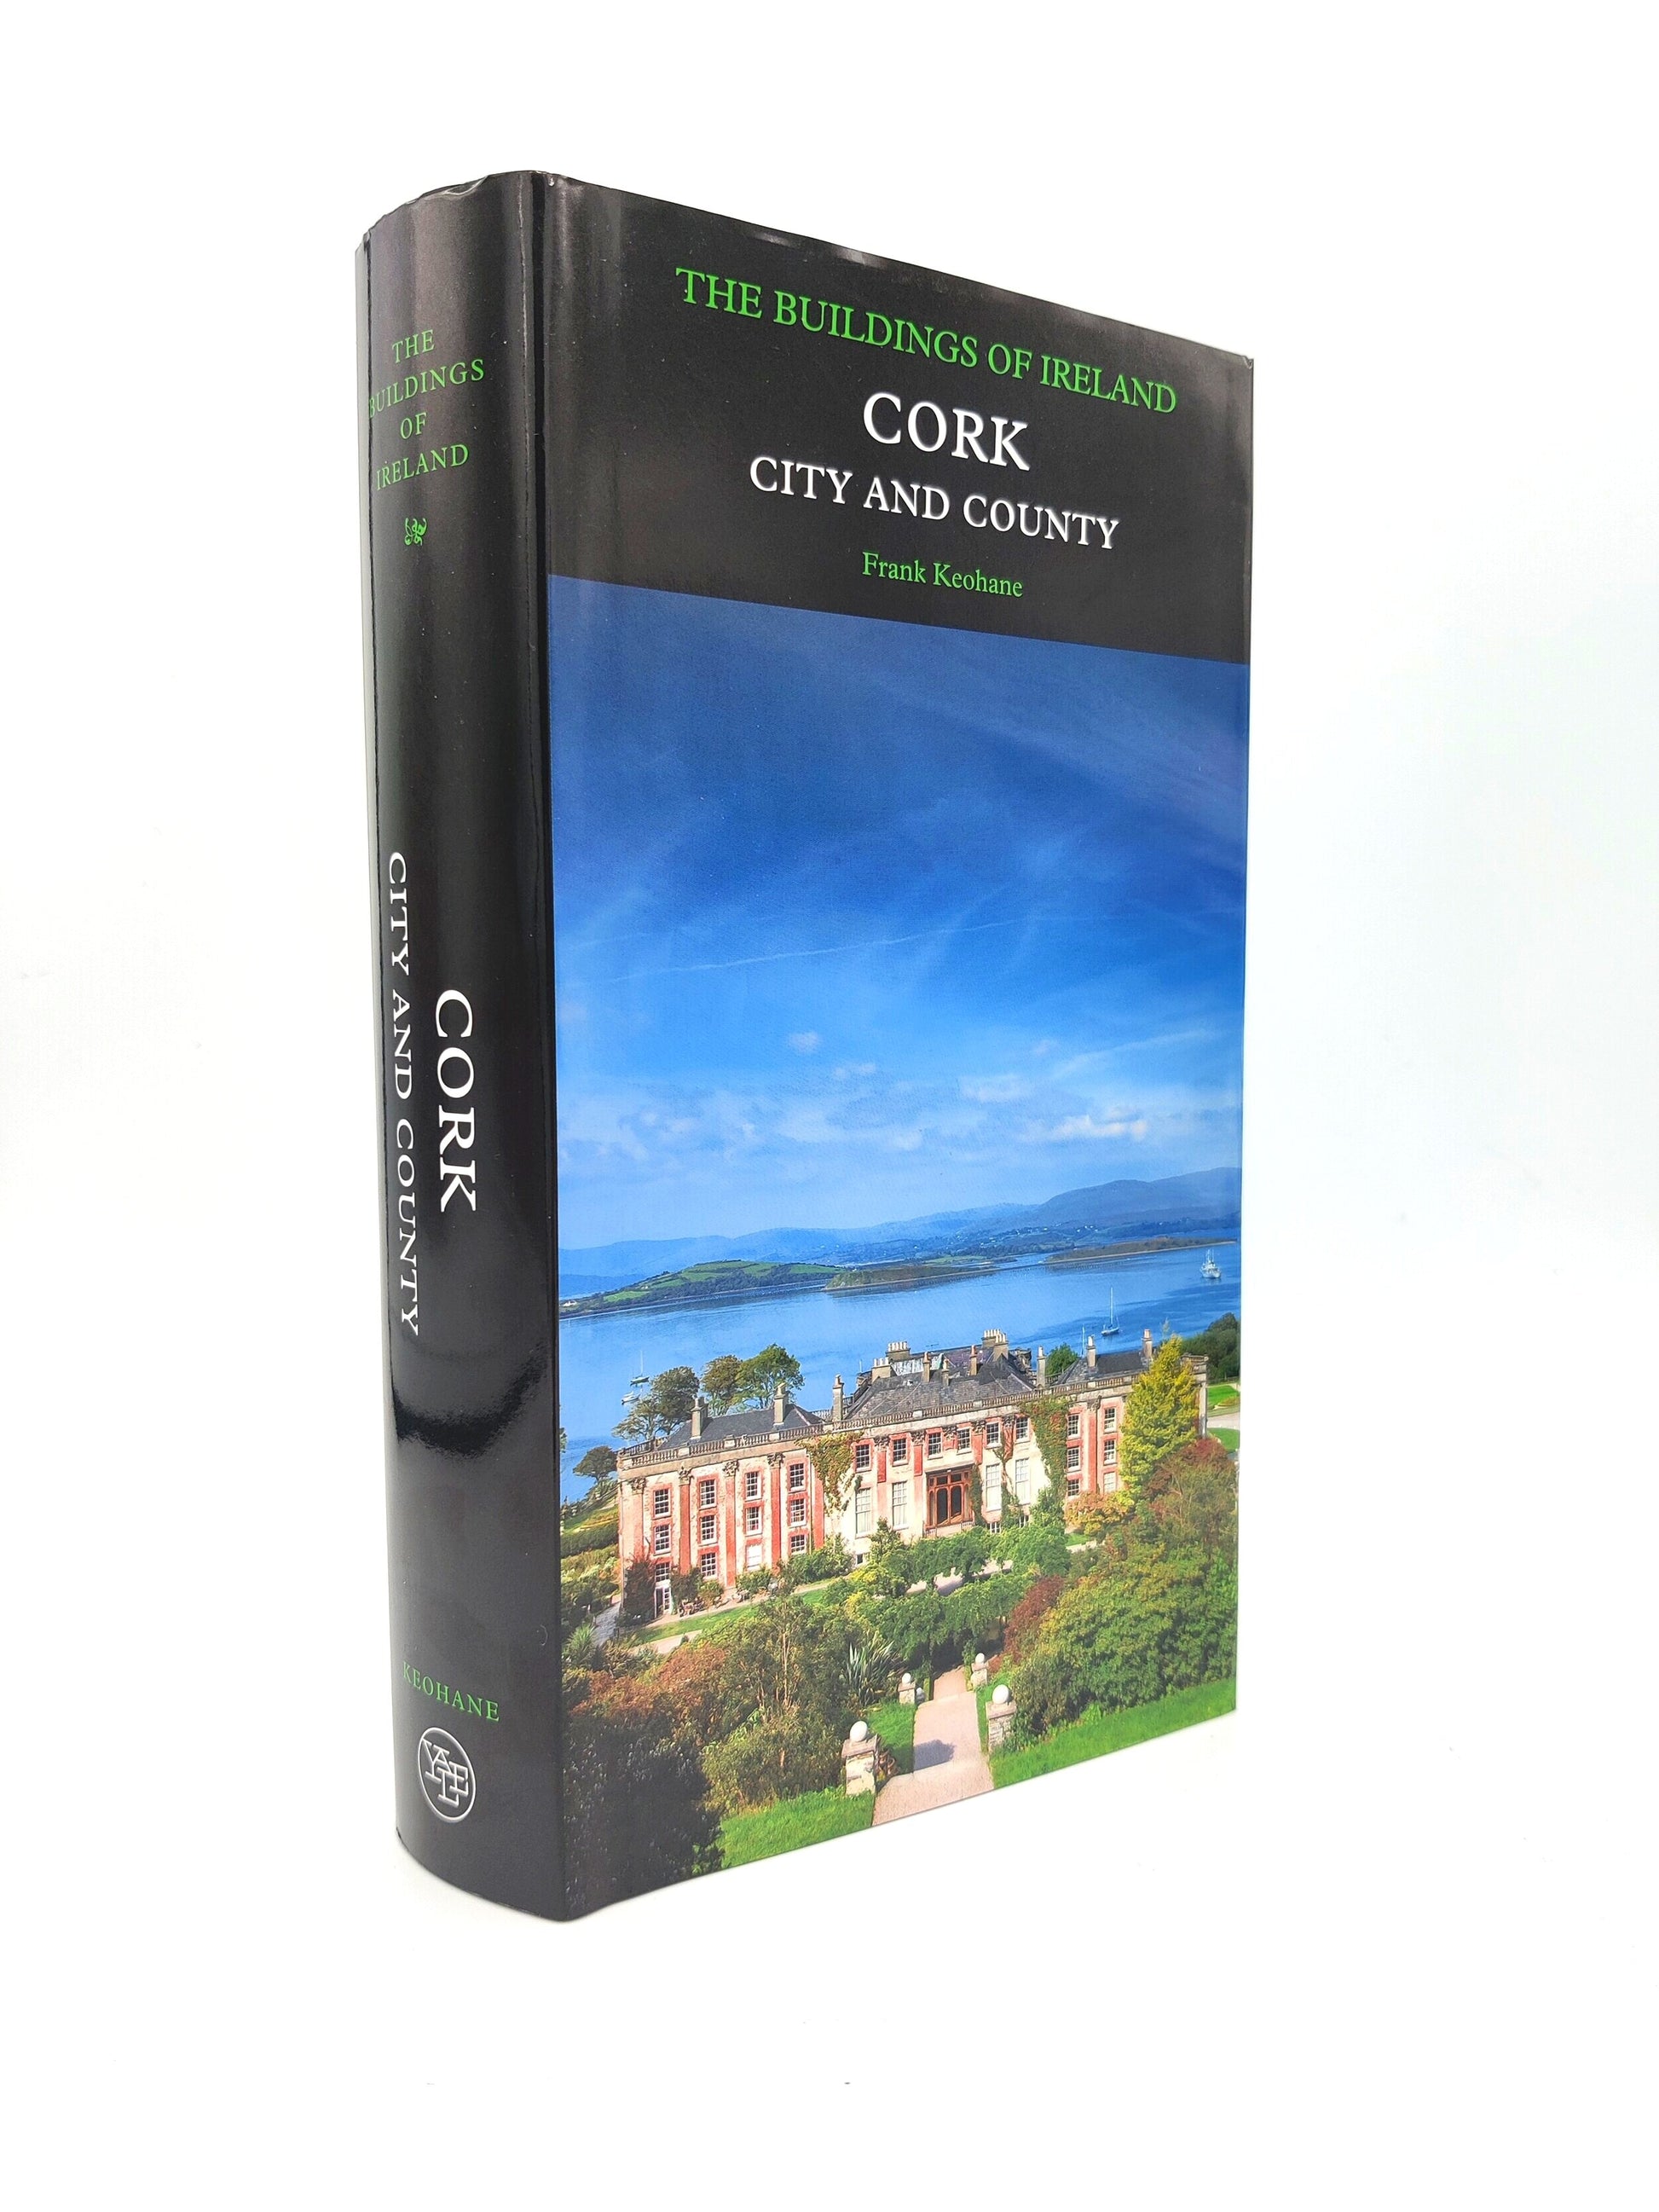 Side View of The Buildings of Ireland: Cork City and County Hardback Book